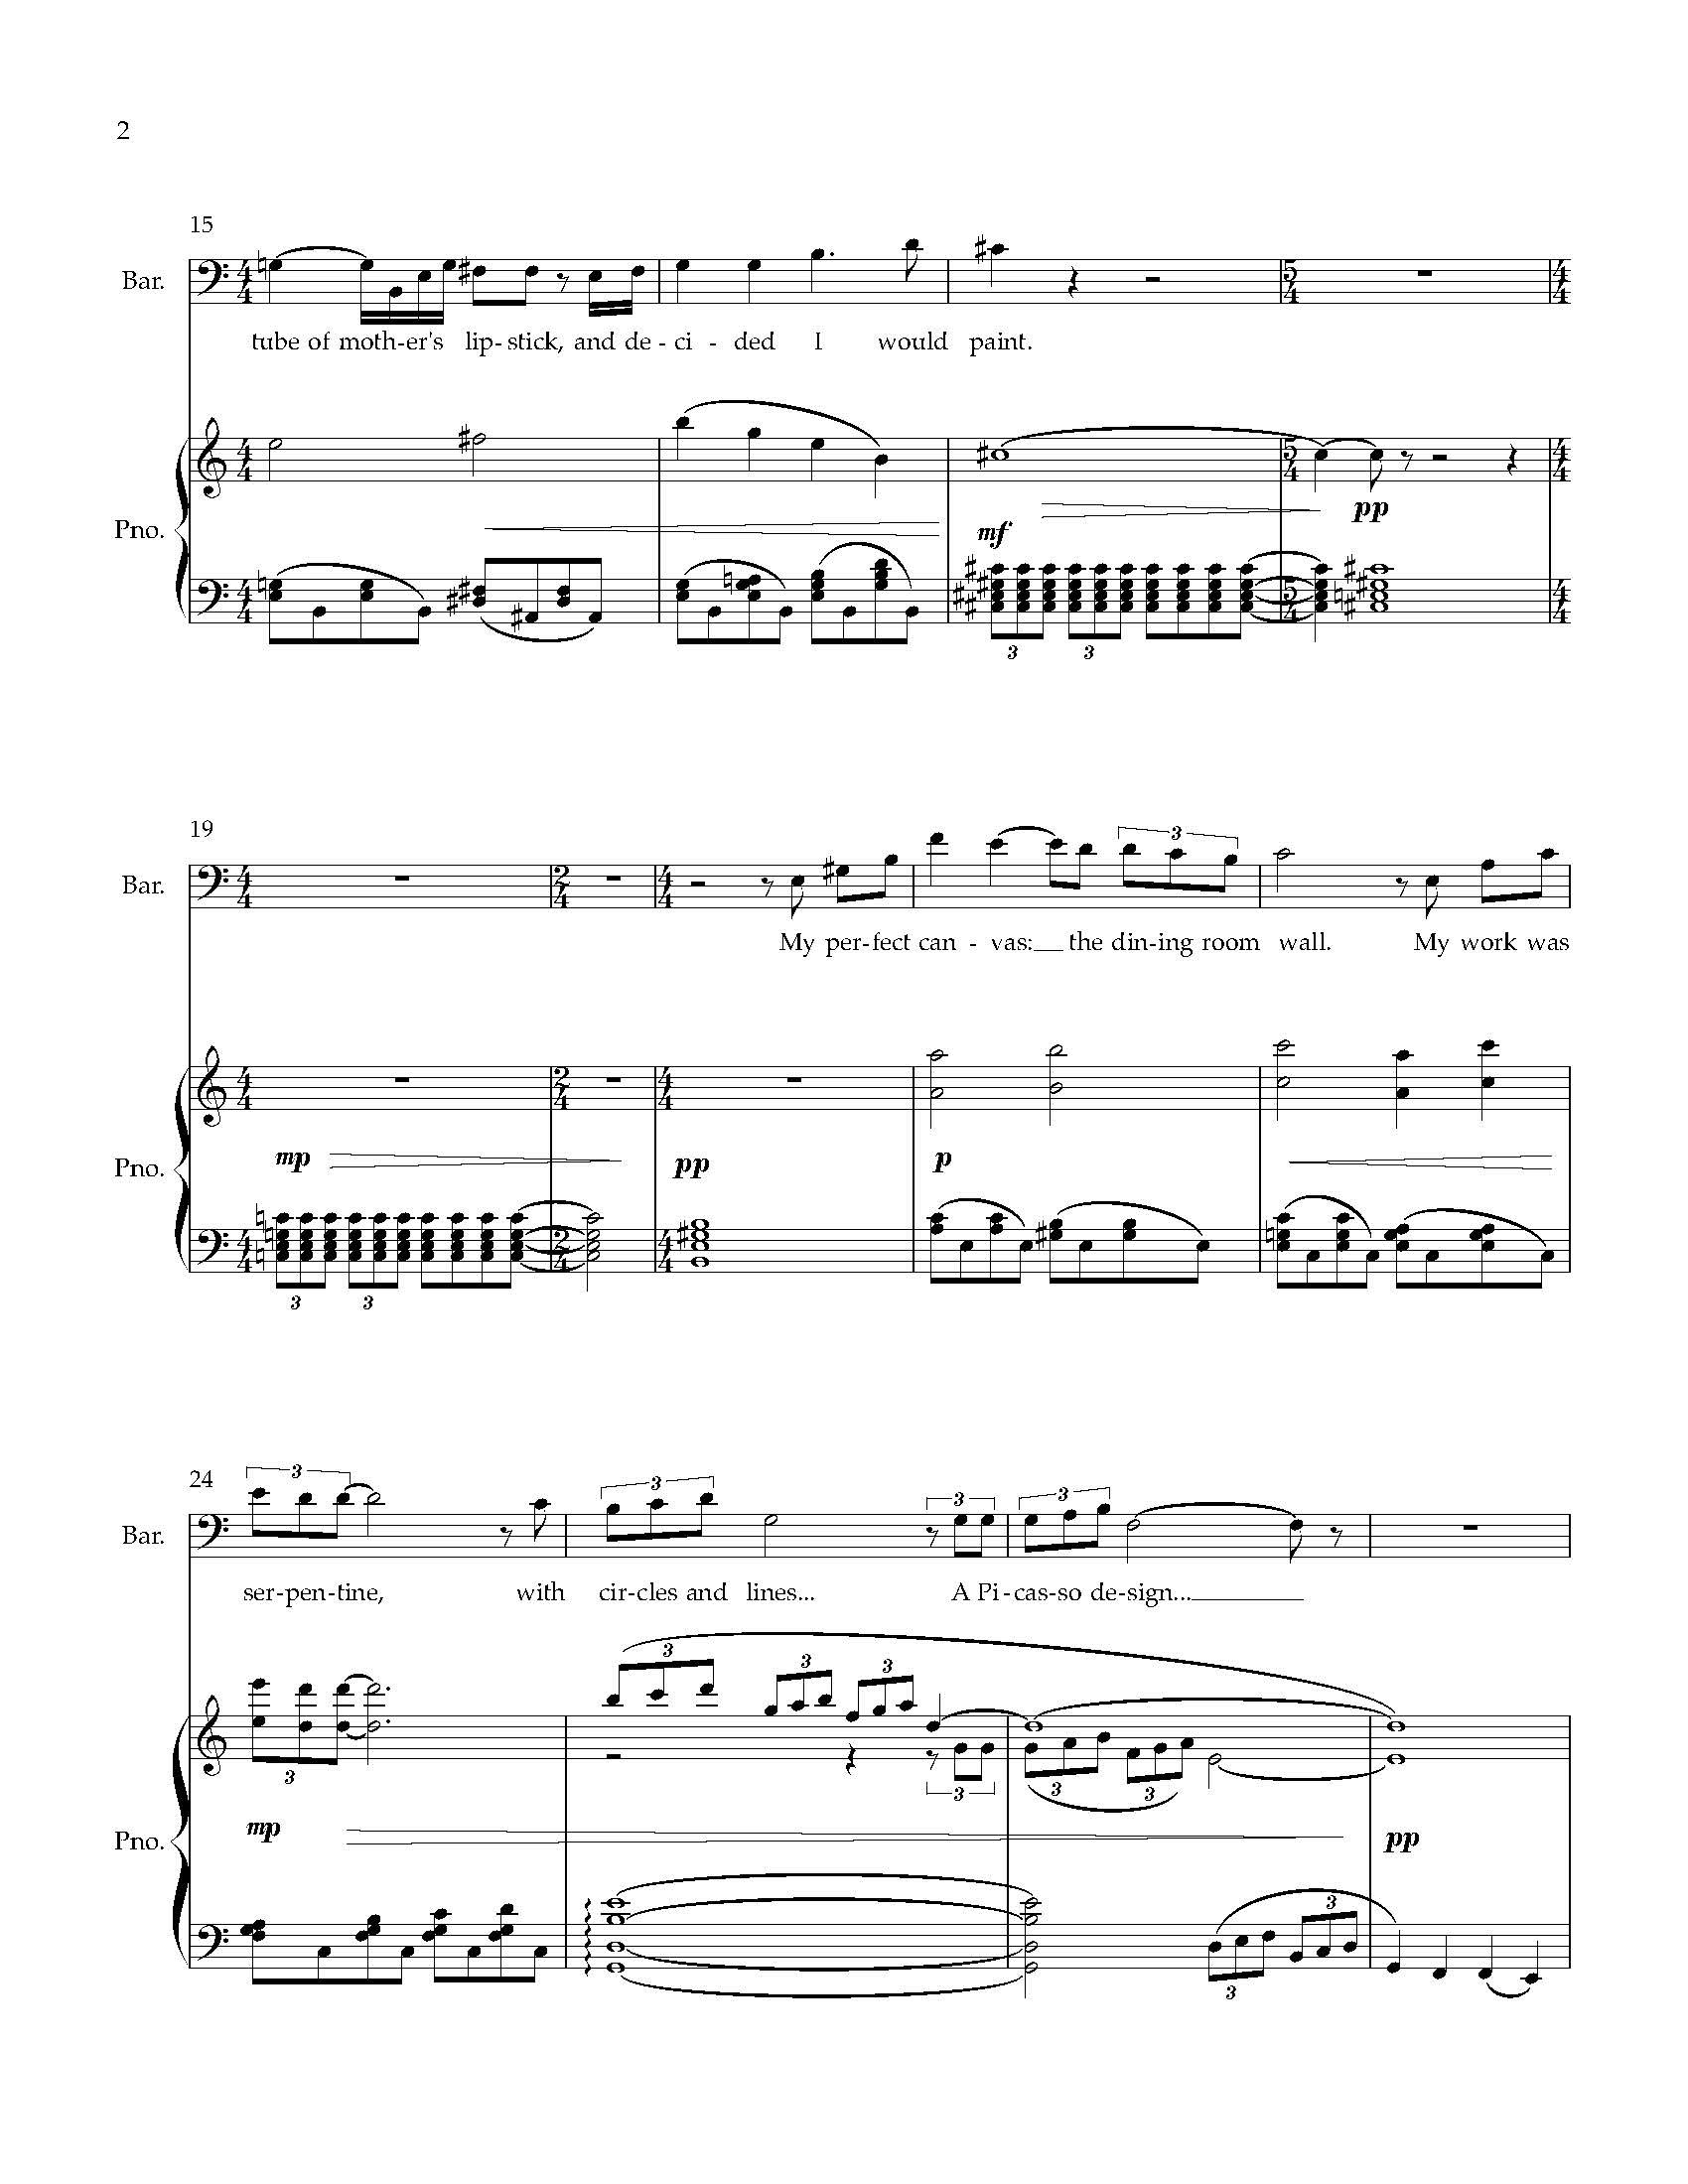 Five Arias from HWGS - Complete Score (1)_Page_06.jpg